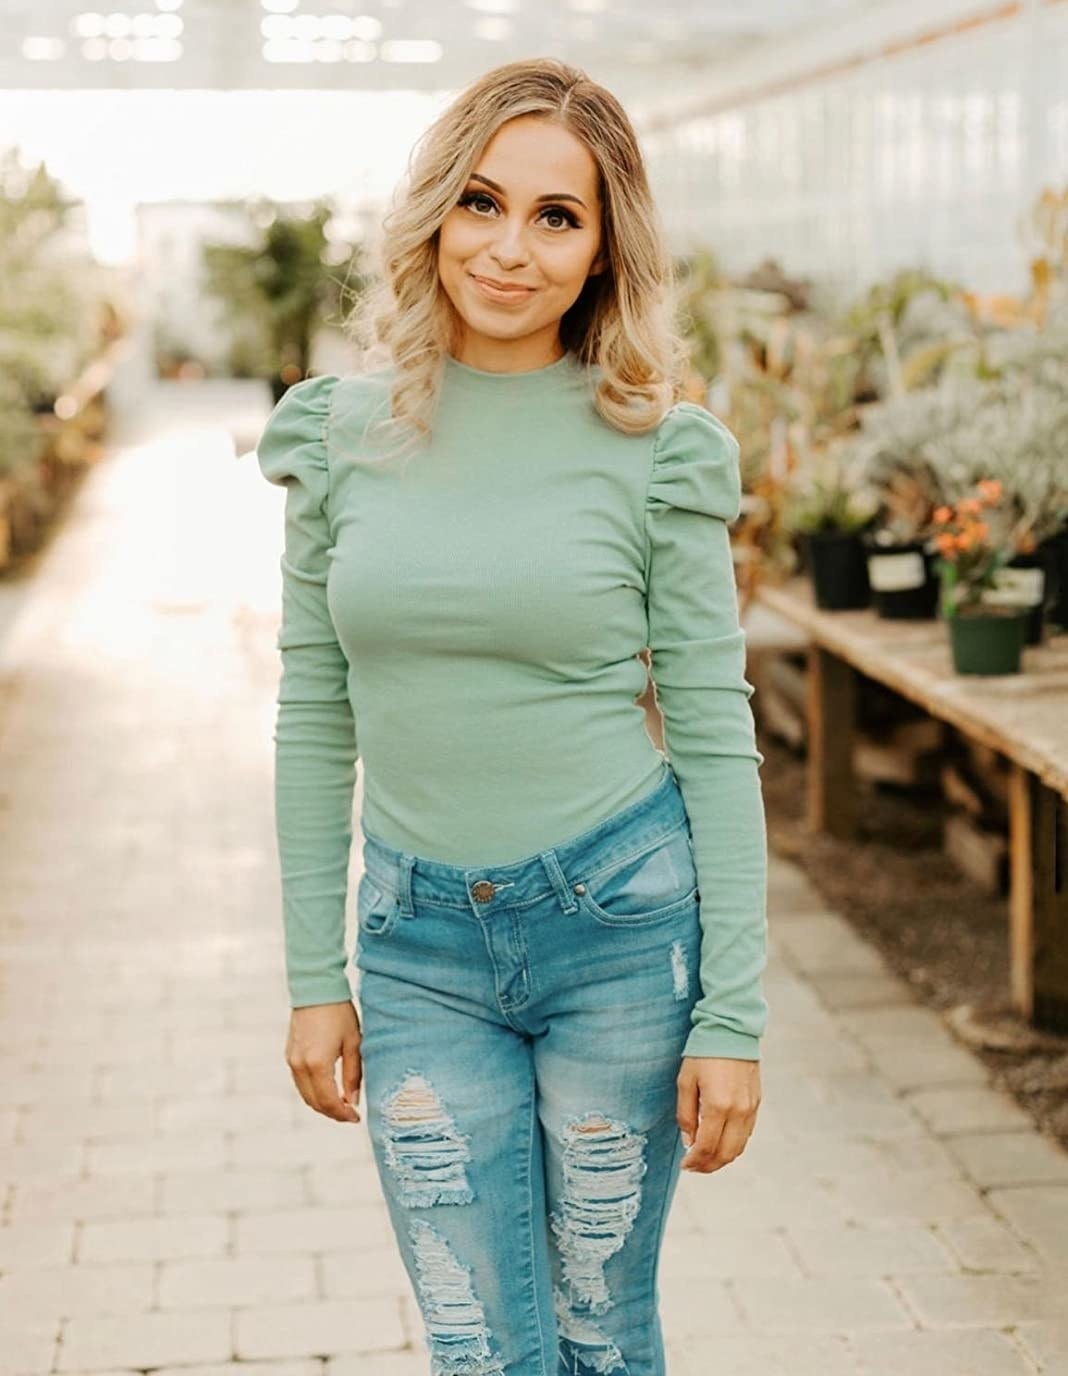 Reviewer wearing mint colored top